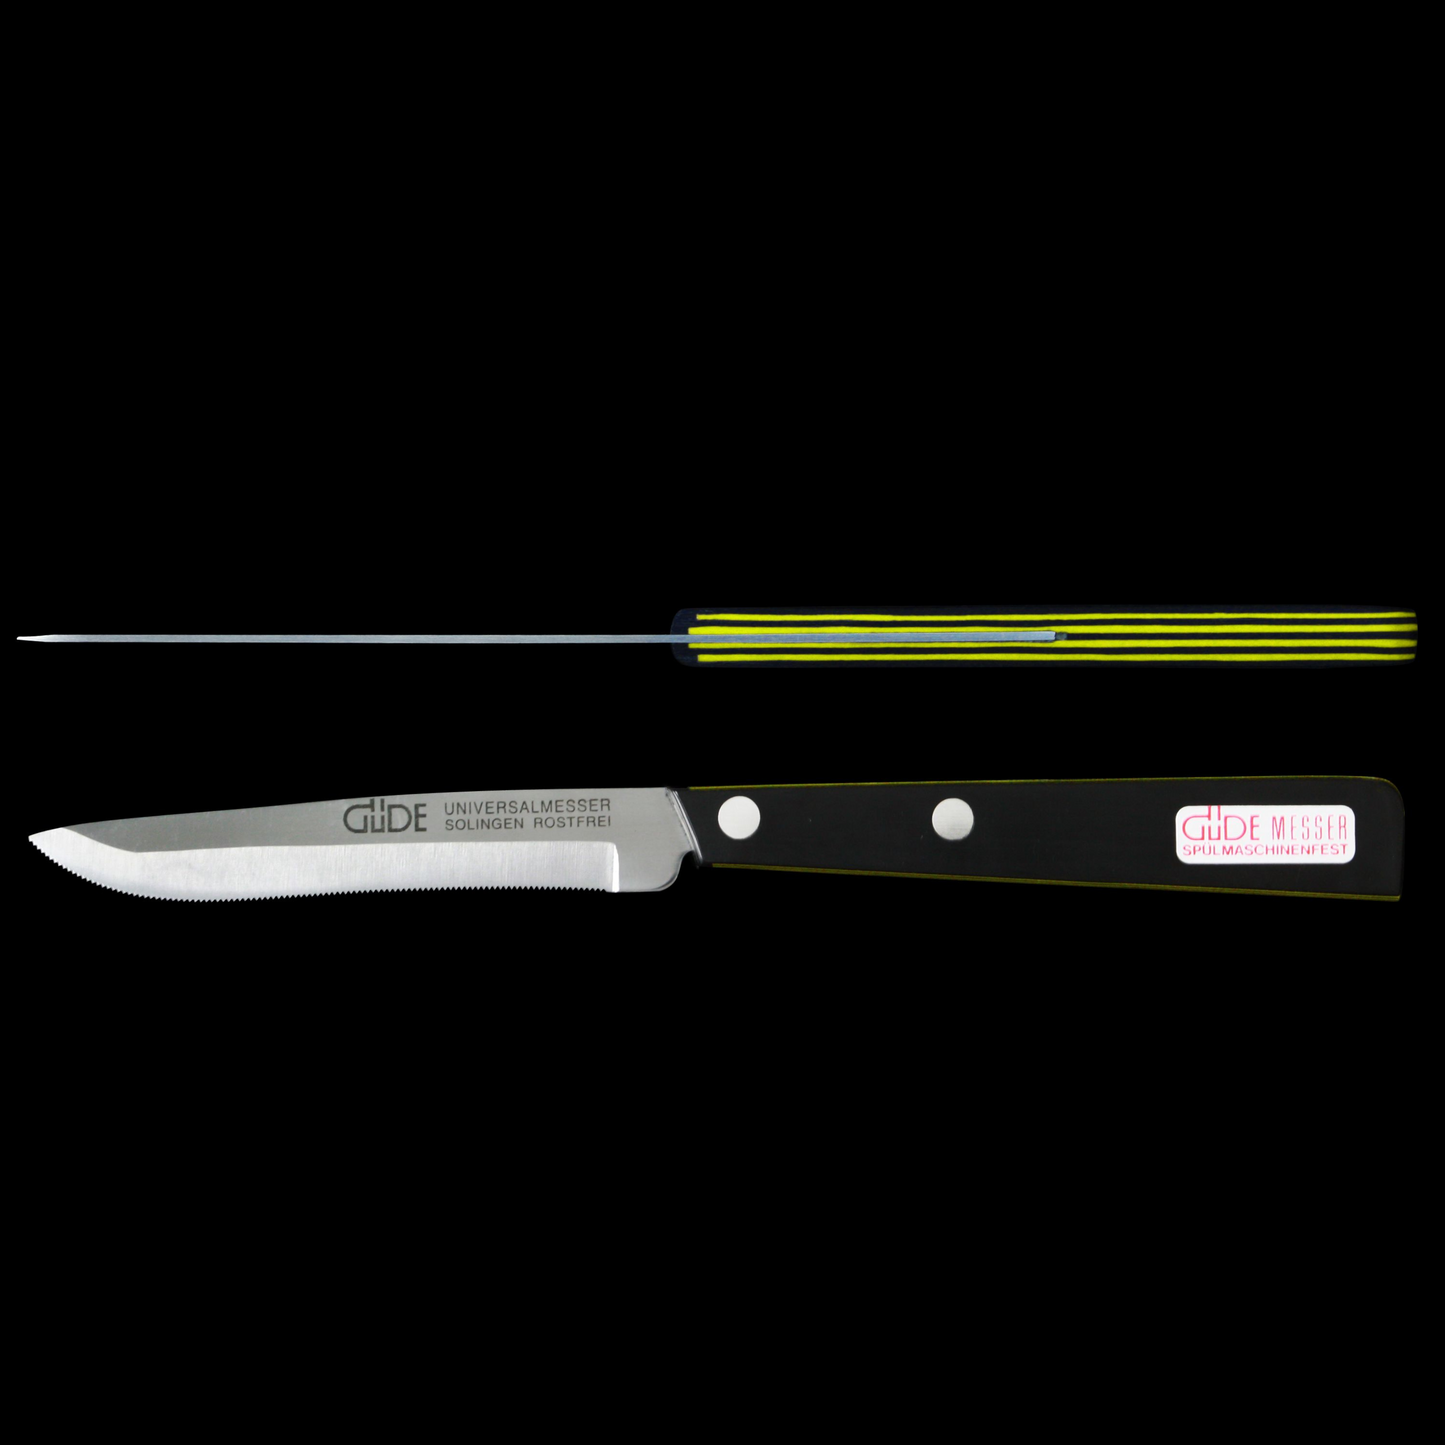 Gude Universal Knife Series 4", Black / Yellow Hostaform Handle and Serrated Blade - GuedeUSA